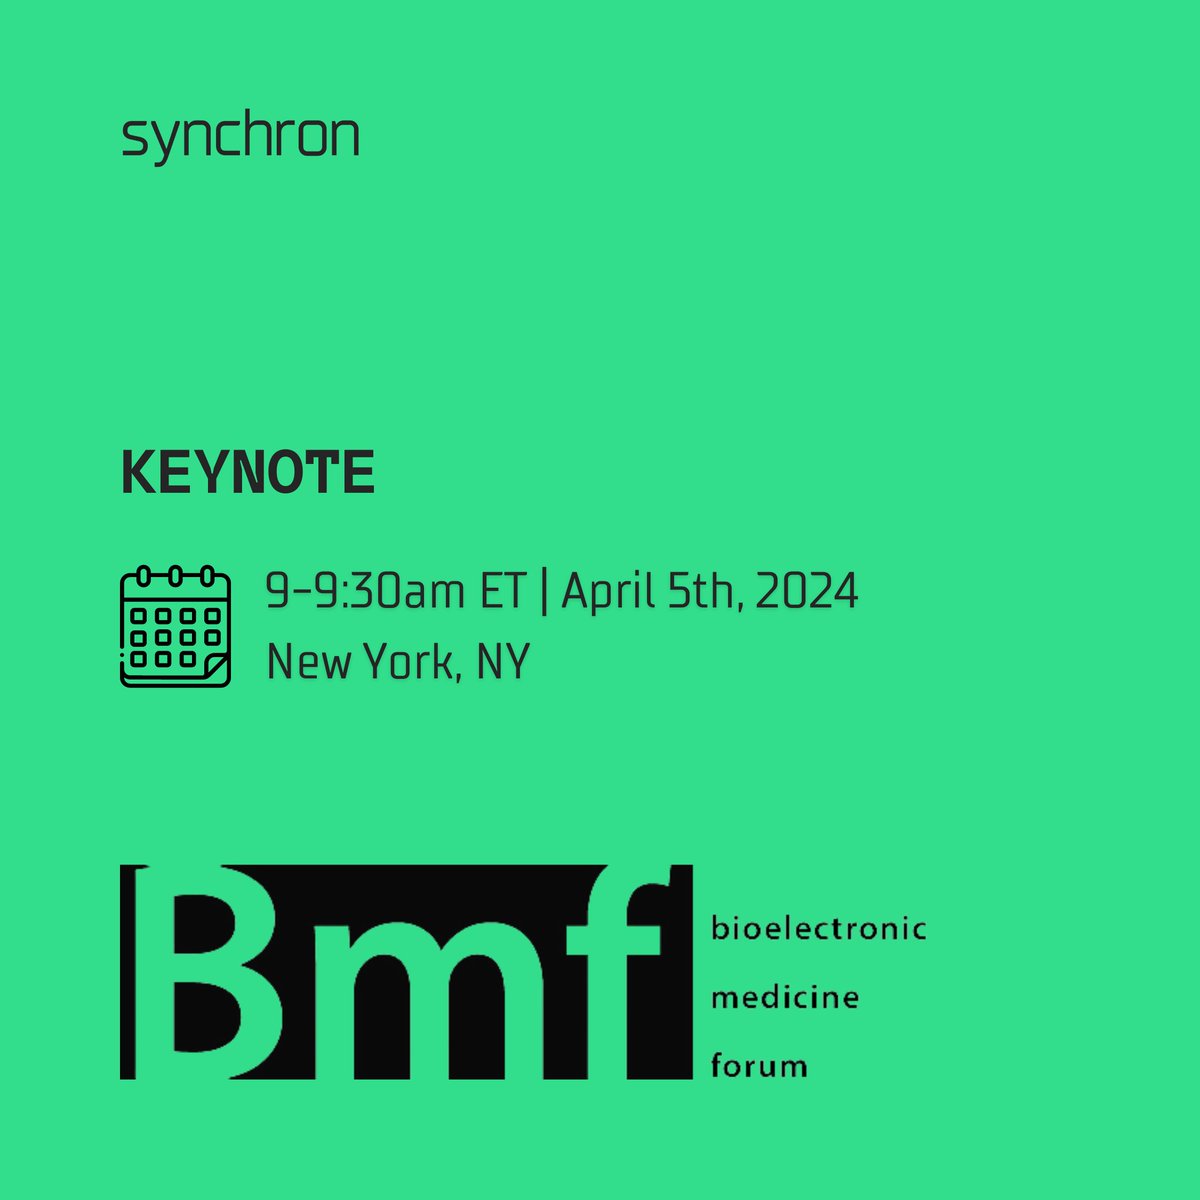 Our CEO @tomoxl will keynote the Bioelectronic Medicine Forum on April 5th at 9am ET. See the full agenda here: neurotechreports.com/pages/bmfagend…